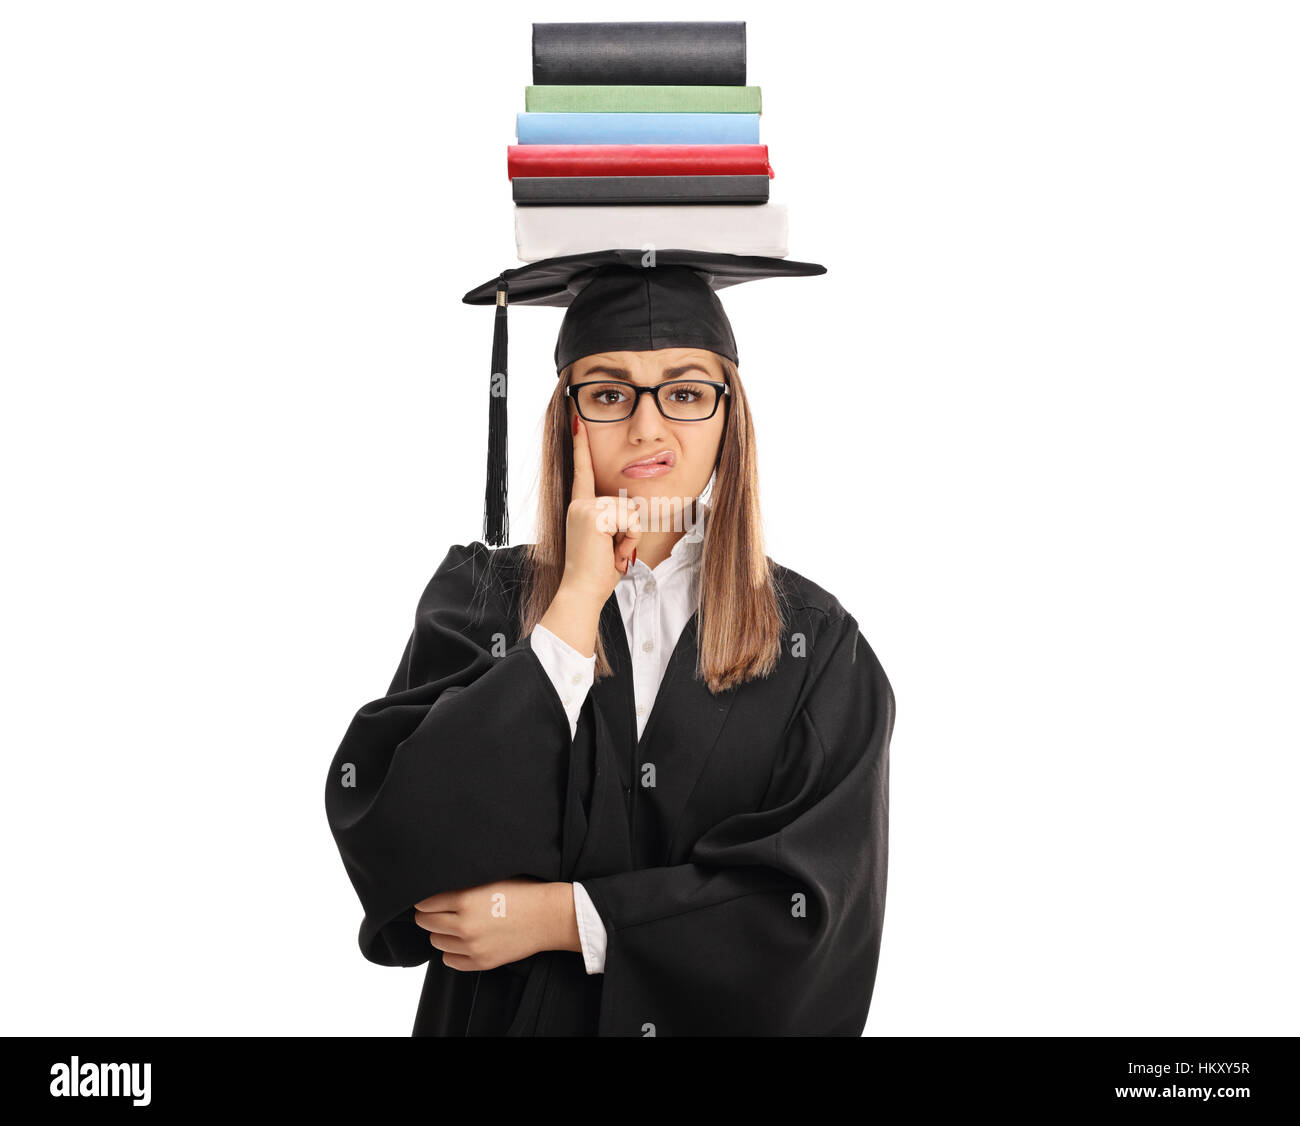 Upset graduate student with a stack of books on top of her head looking at the camera isolated on white background Stock Photo